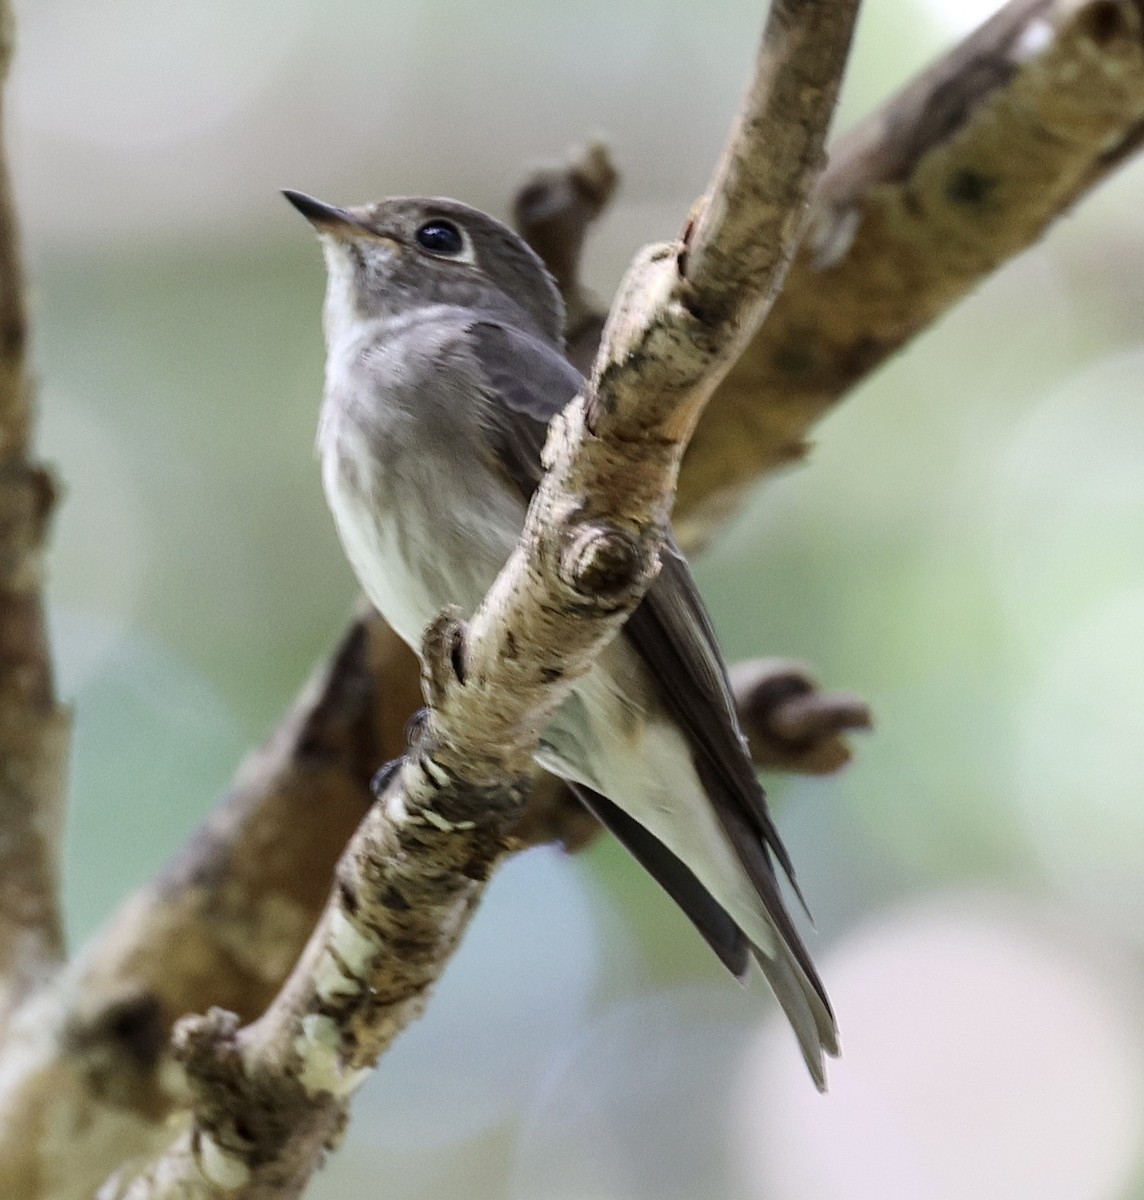 Dark-sided Flycatcher - The falcon cannot hear the falconer